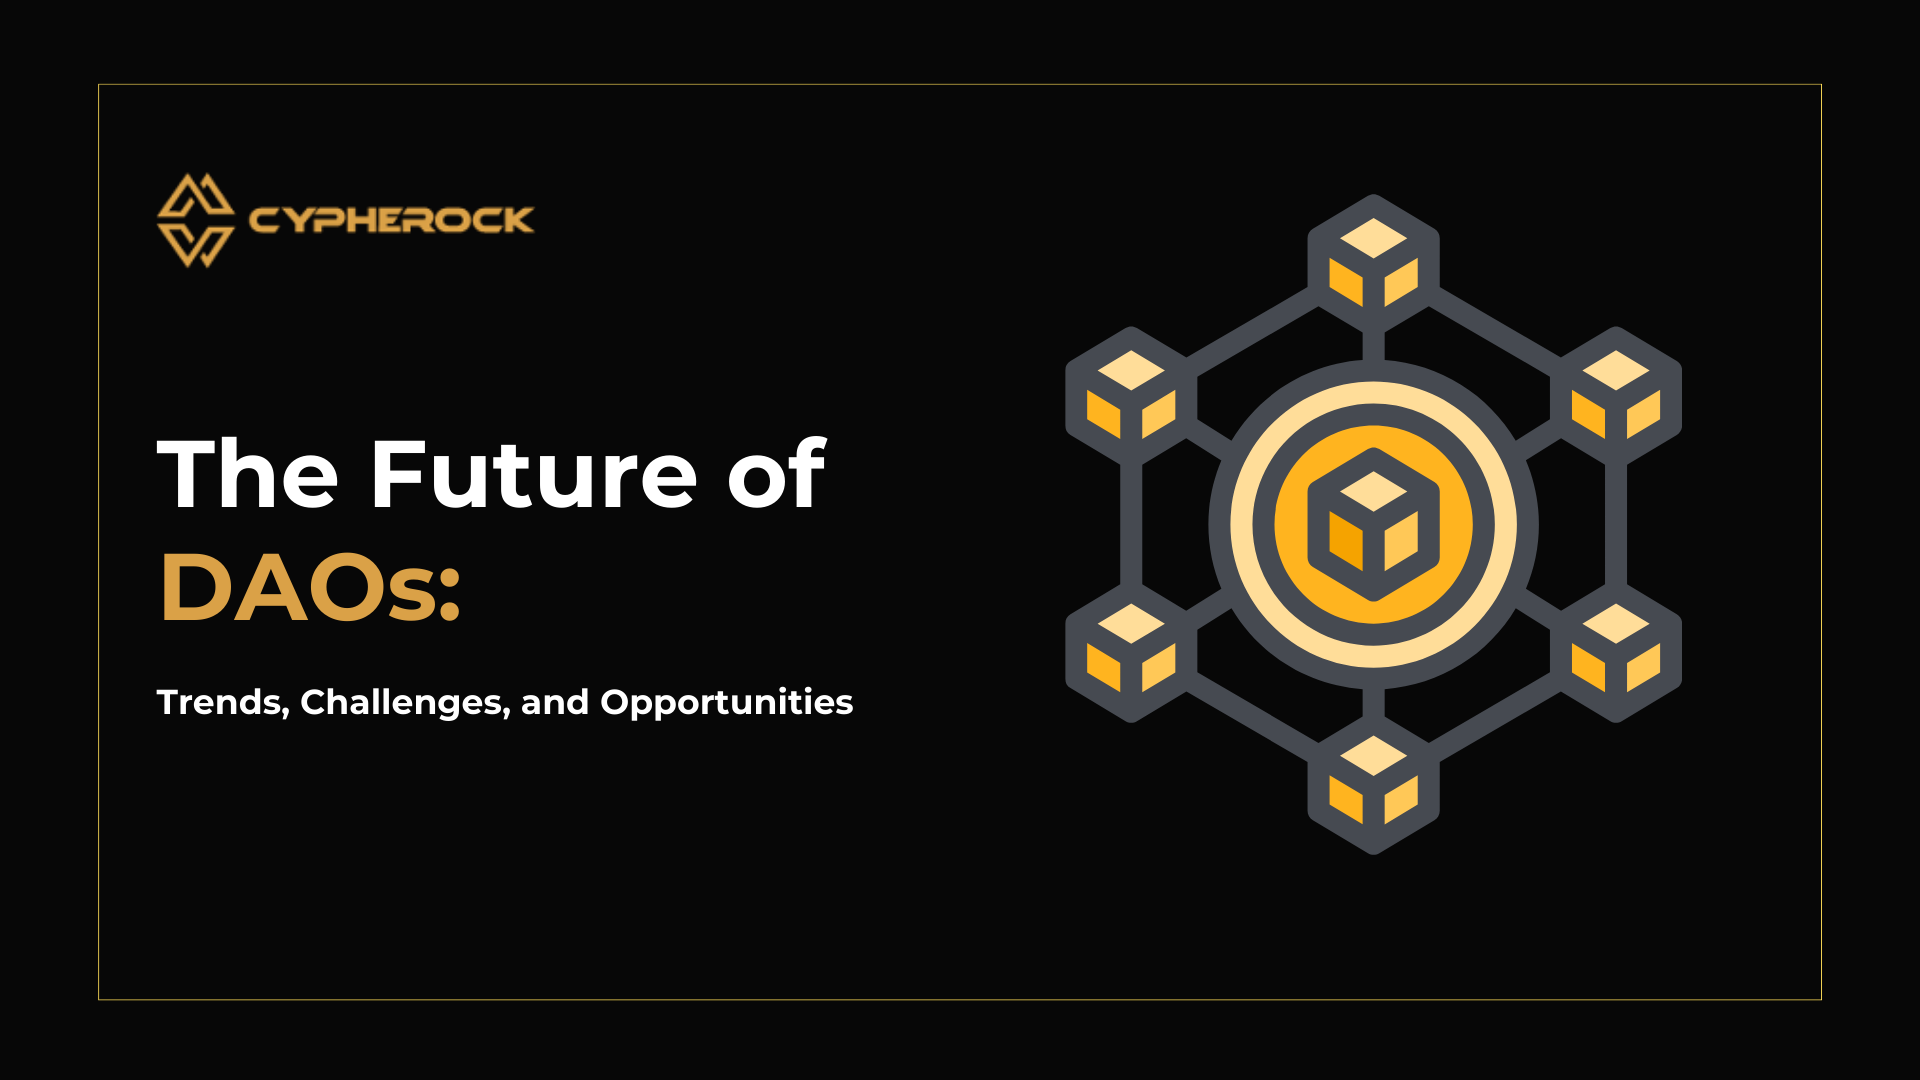 The Future of DAOs: Trends, Challenges, and Opportunities